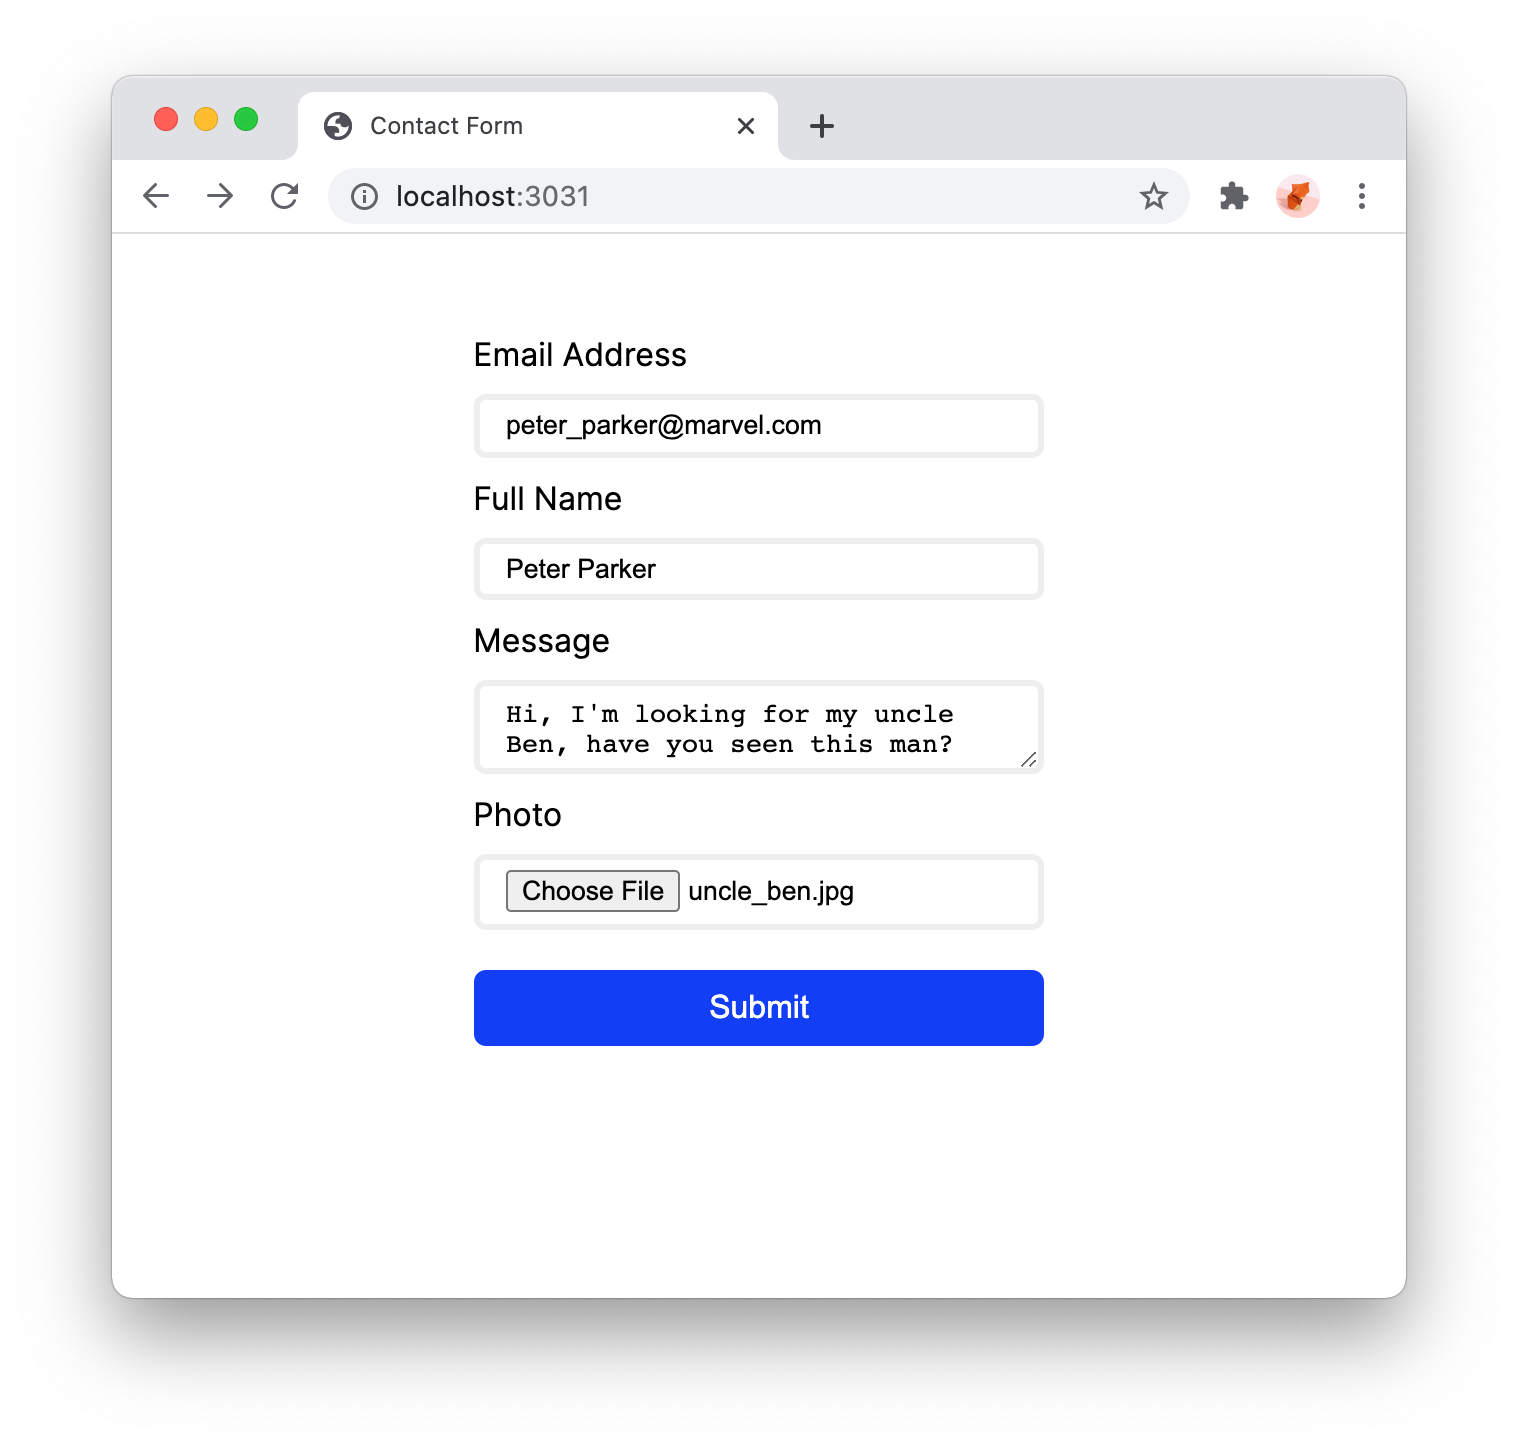 How to create an HTML contact form with file upload to Amazon S3 | Step-by-step guide